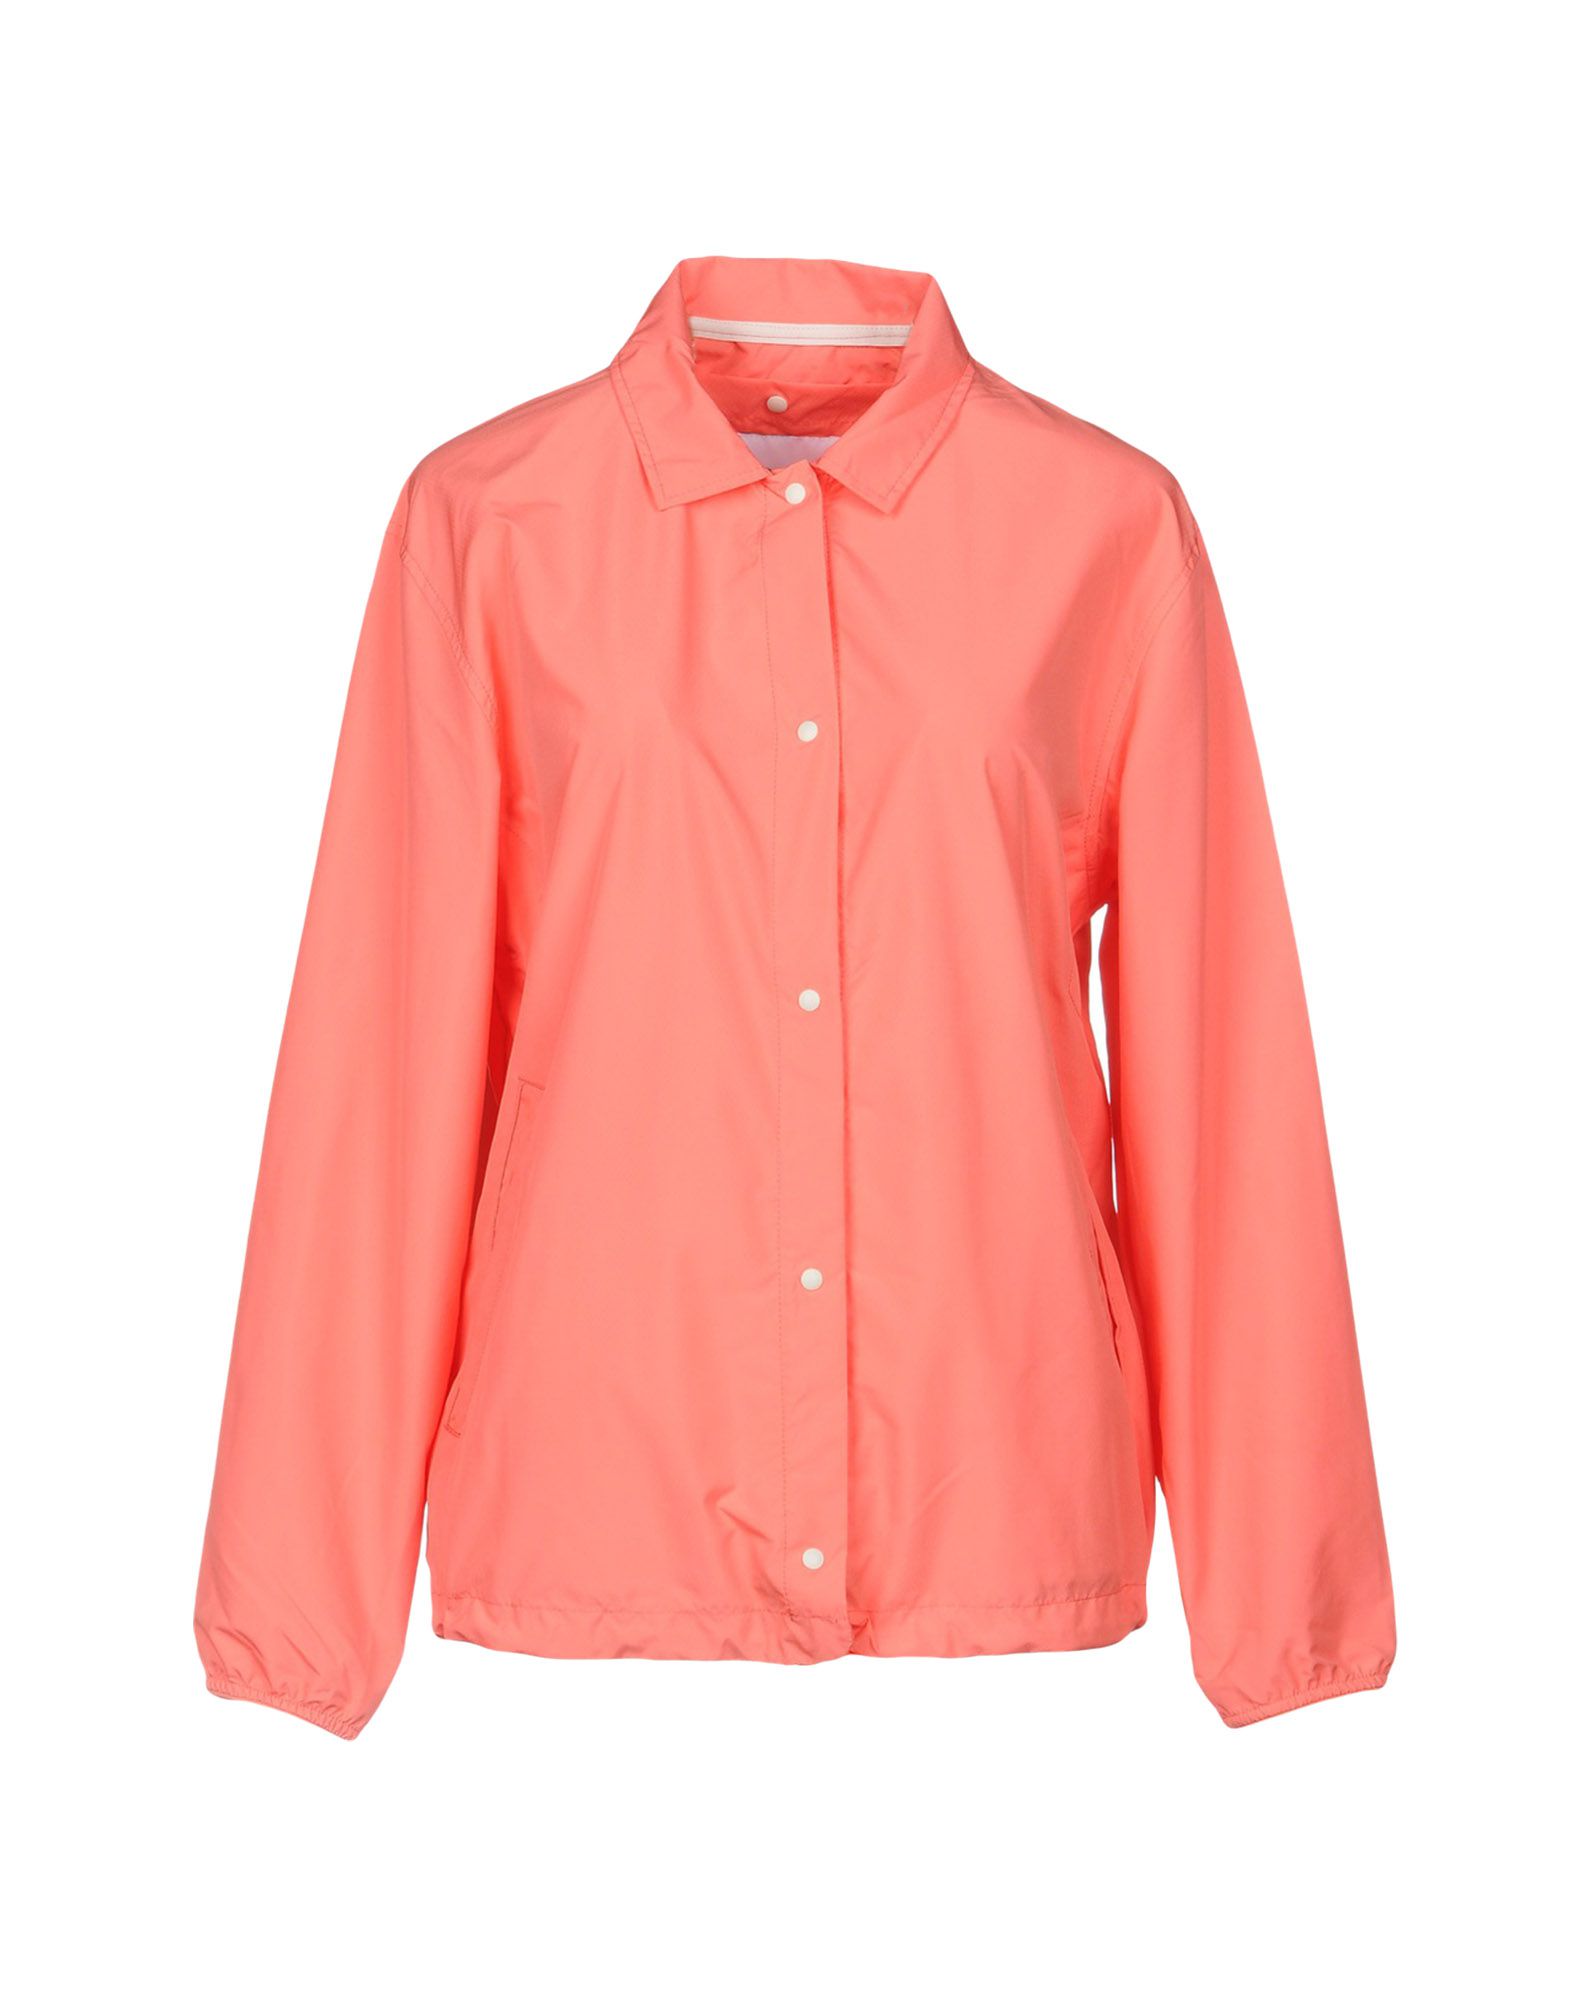 HERSCHEL SUPPLY CO Solid color shirts & blouses,41816448NC 4